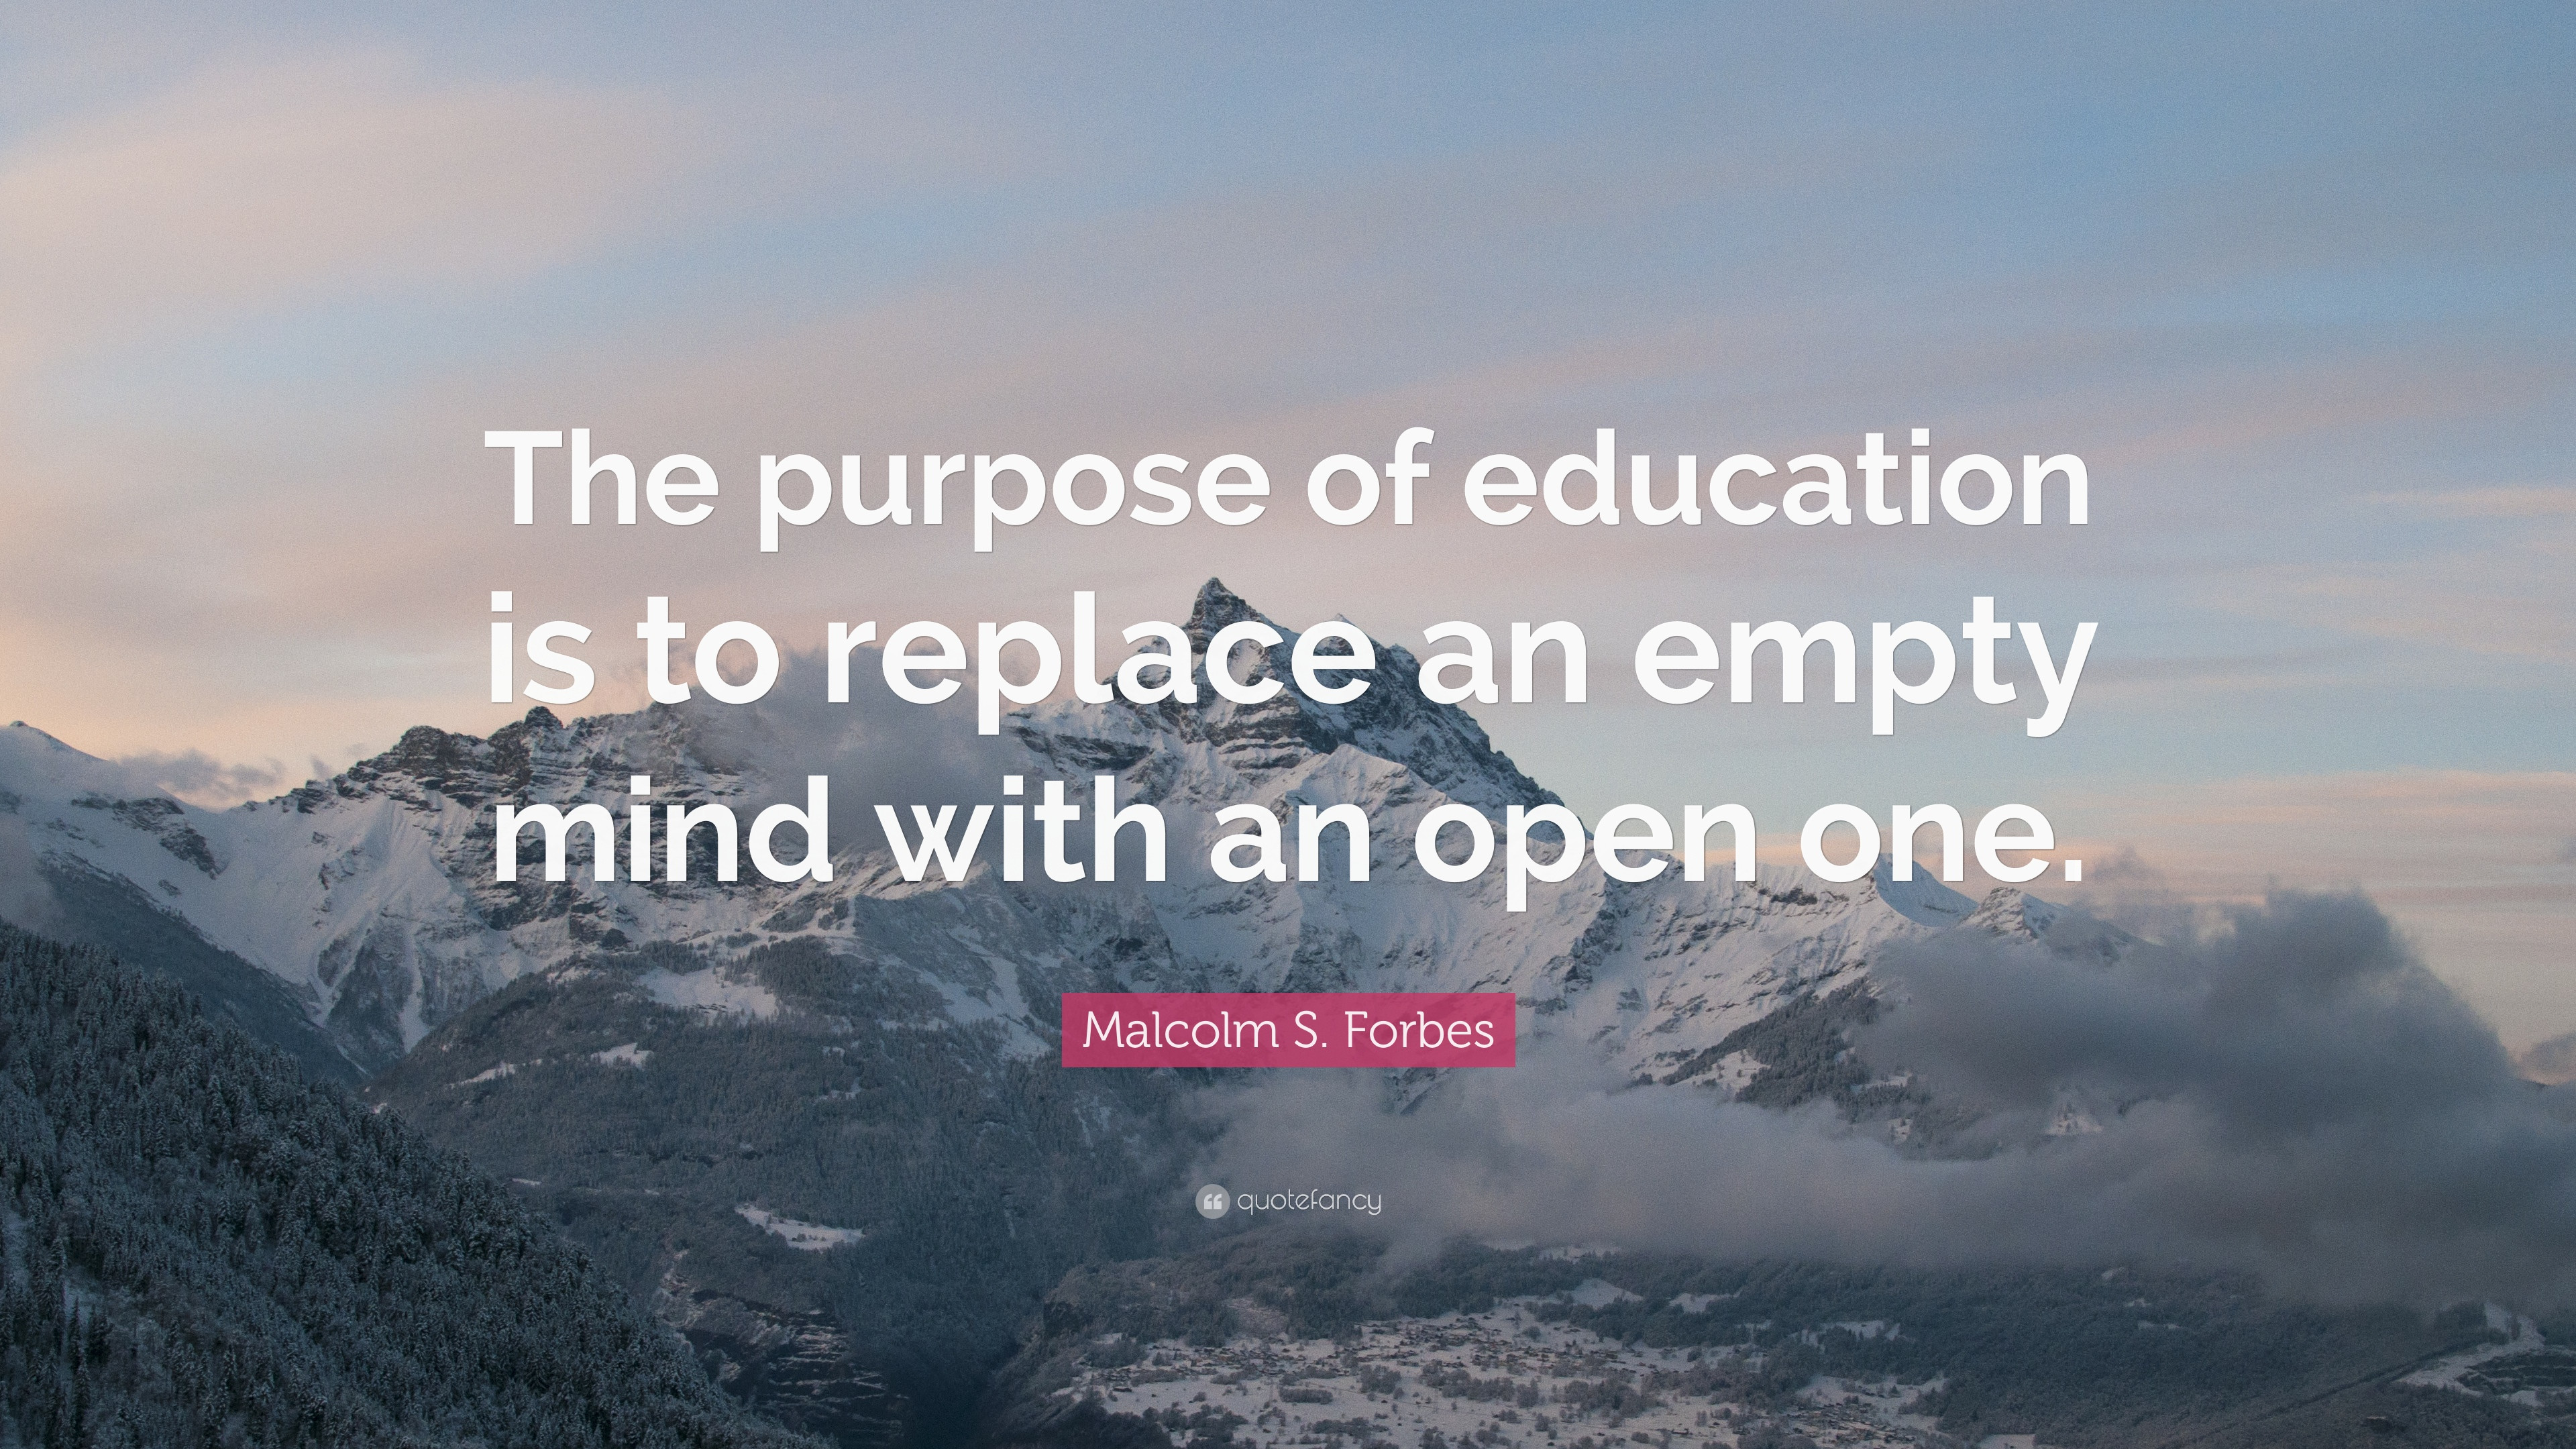 Quotes For Education
 Education Quotes Askideas